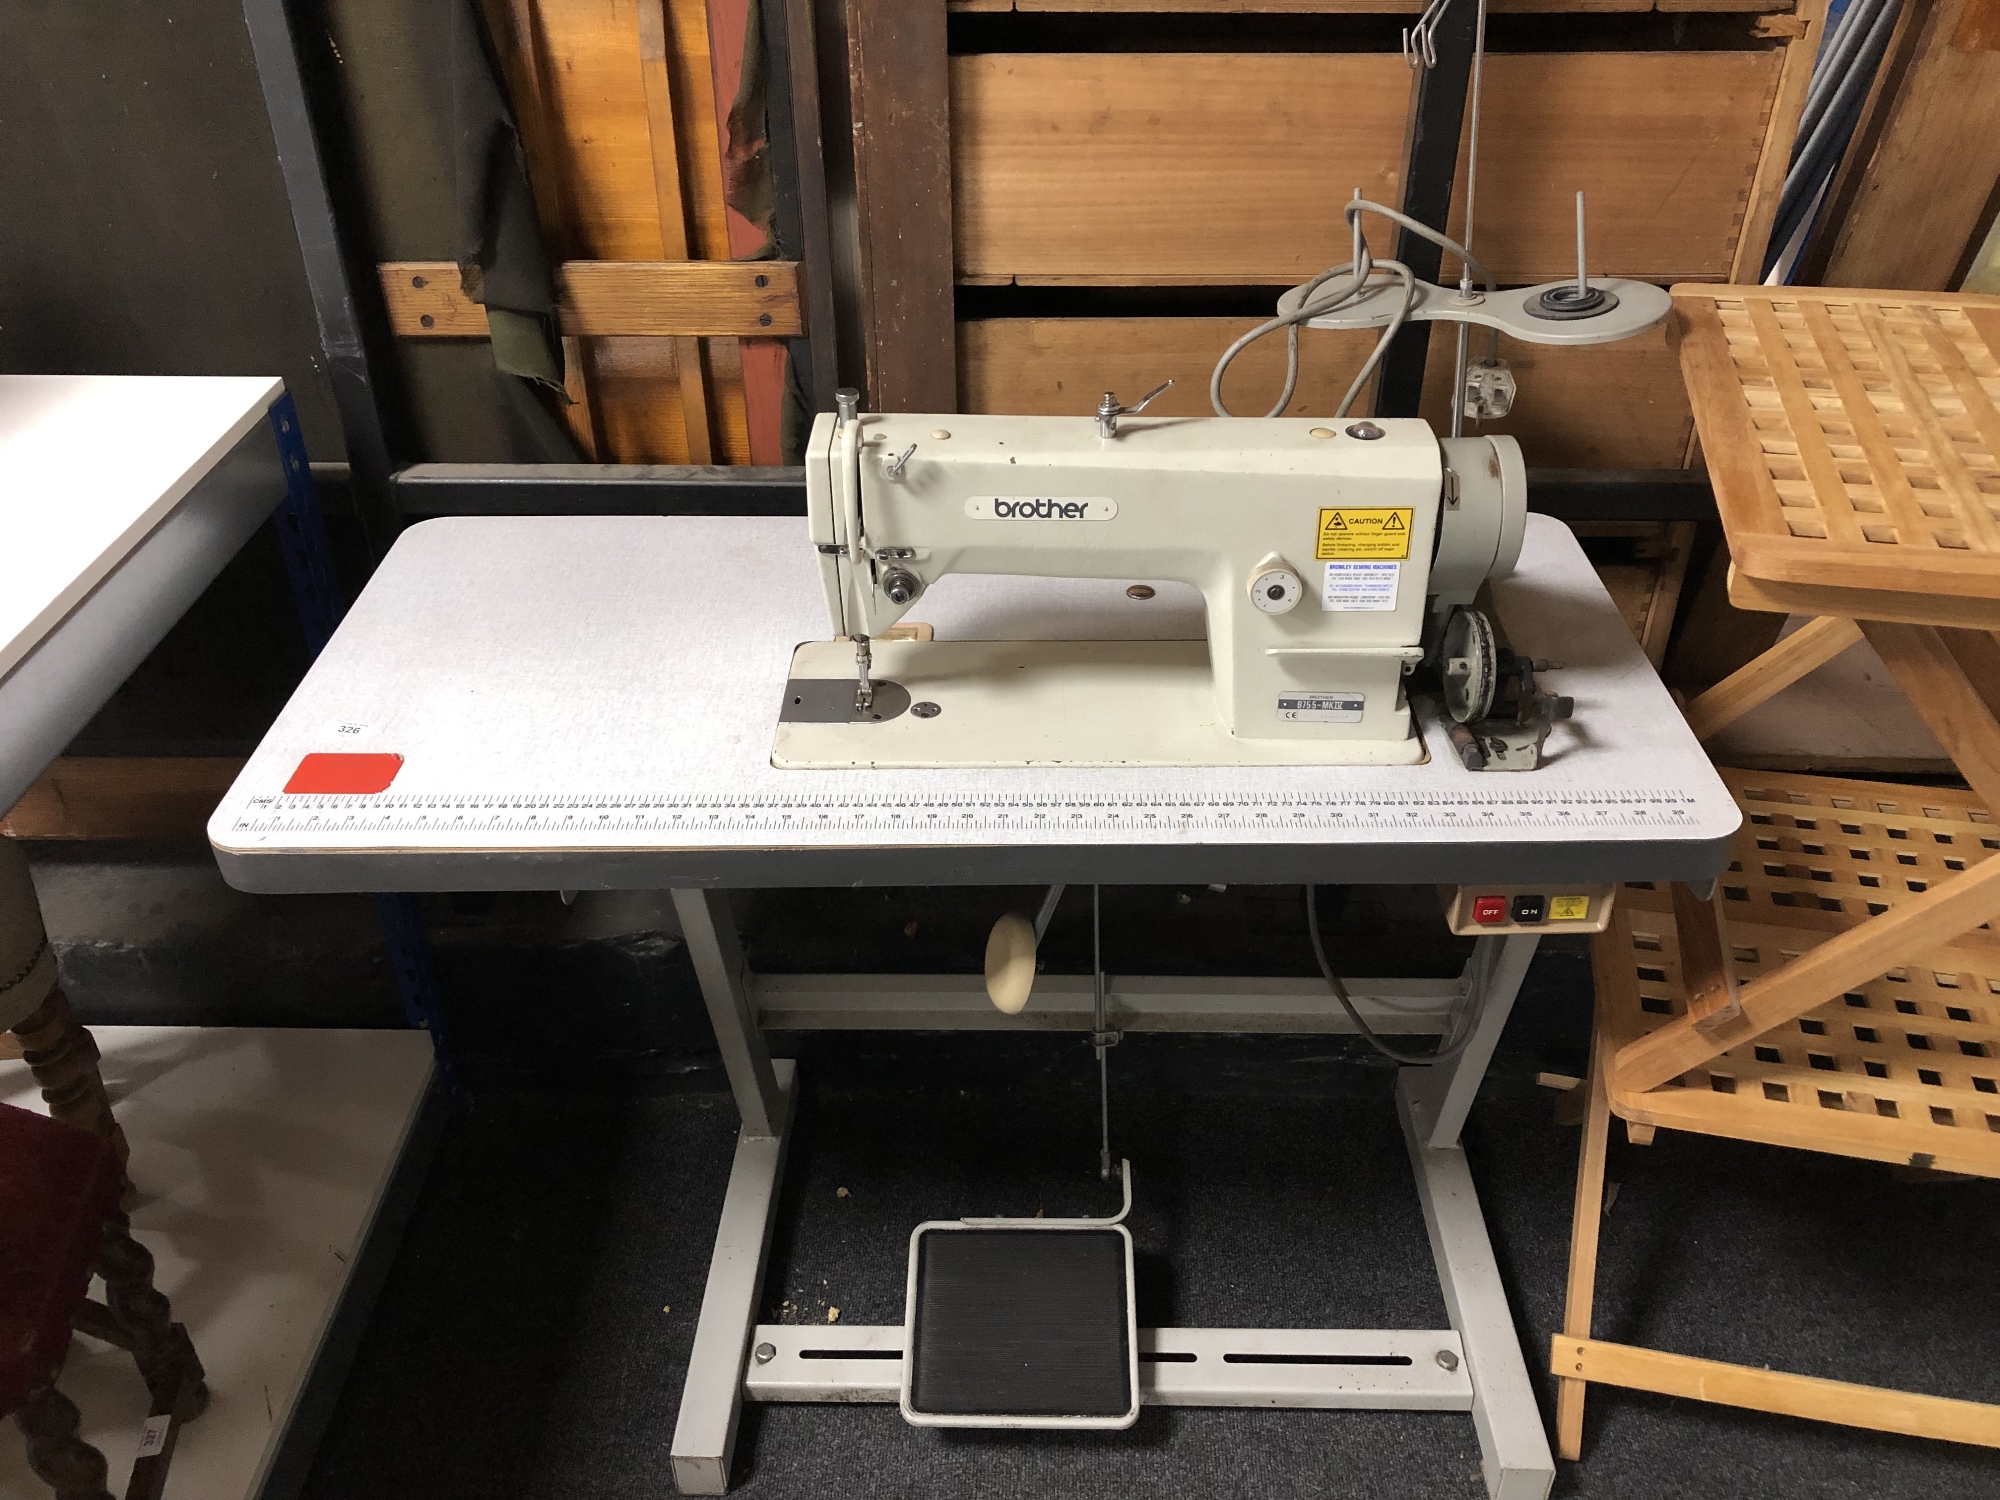 A Brother industrial sewing machine